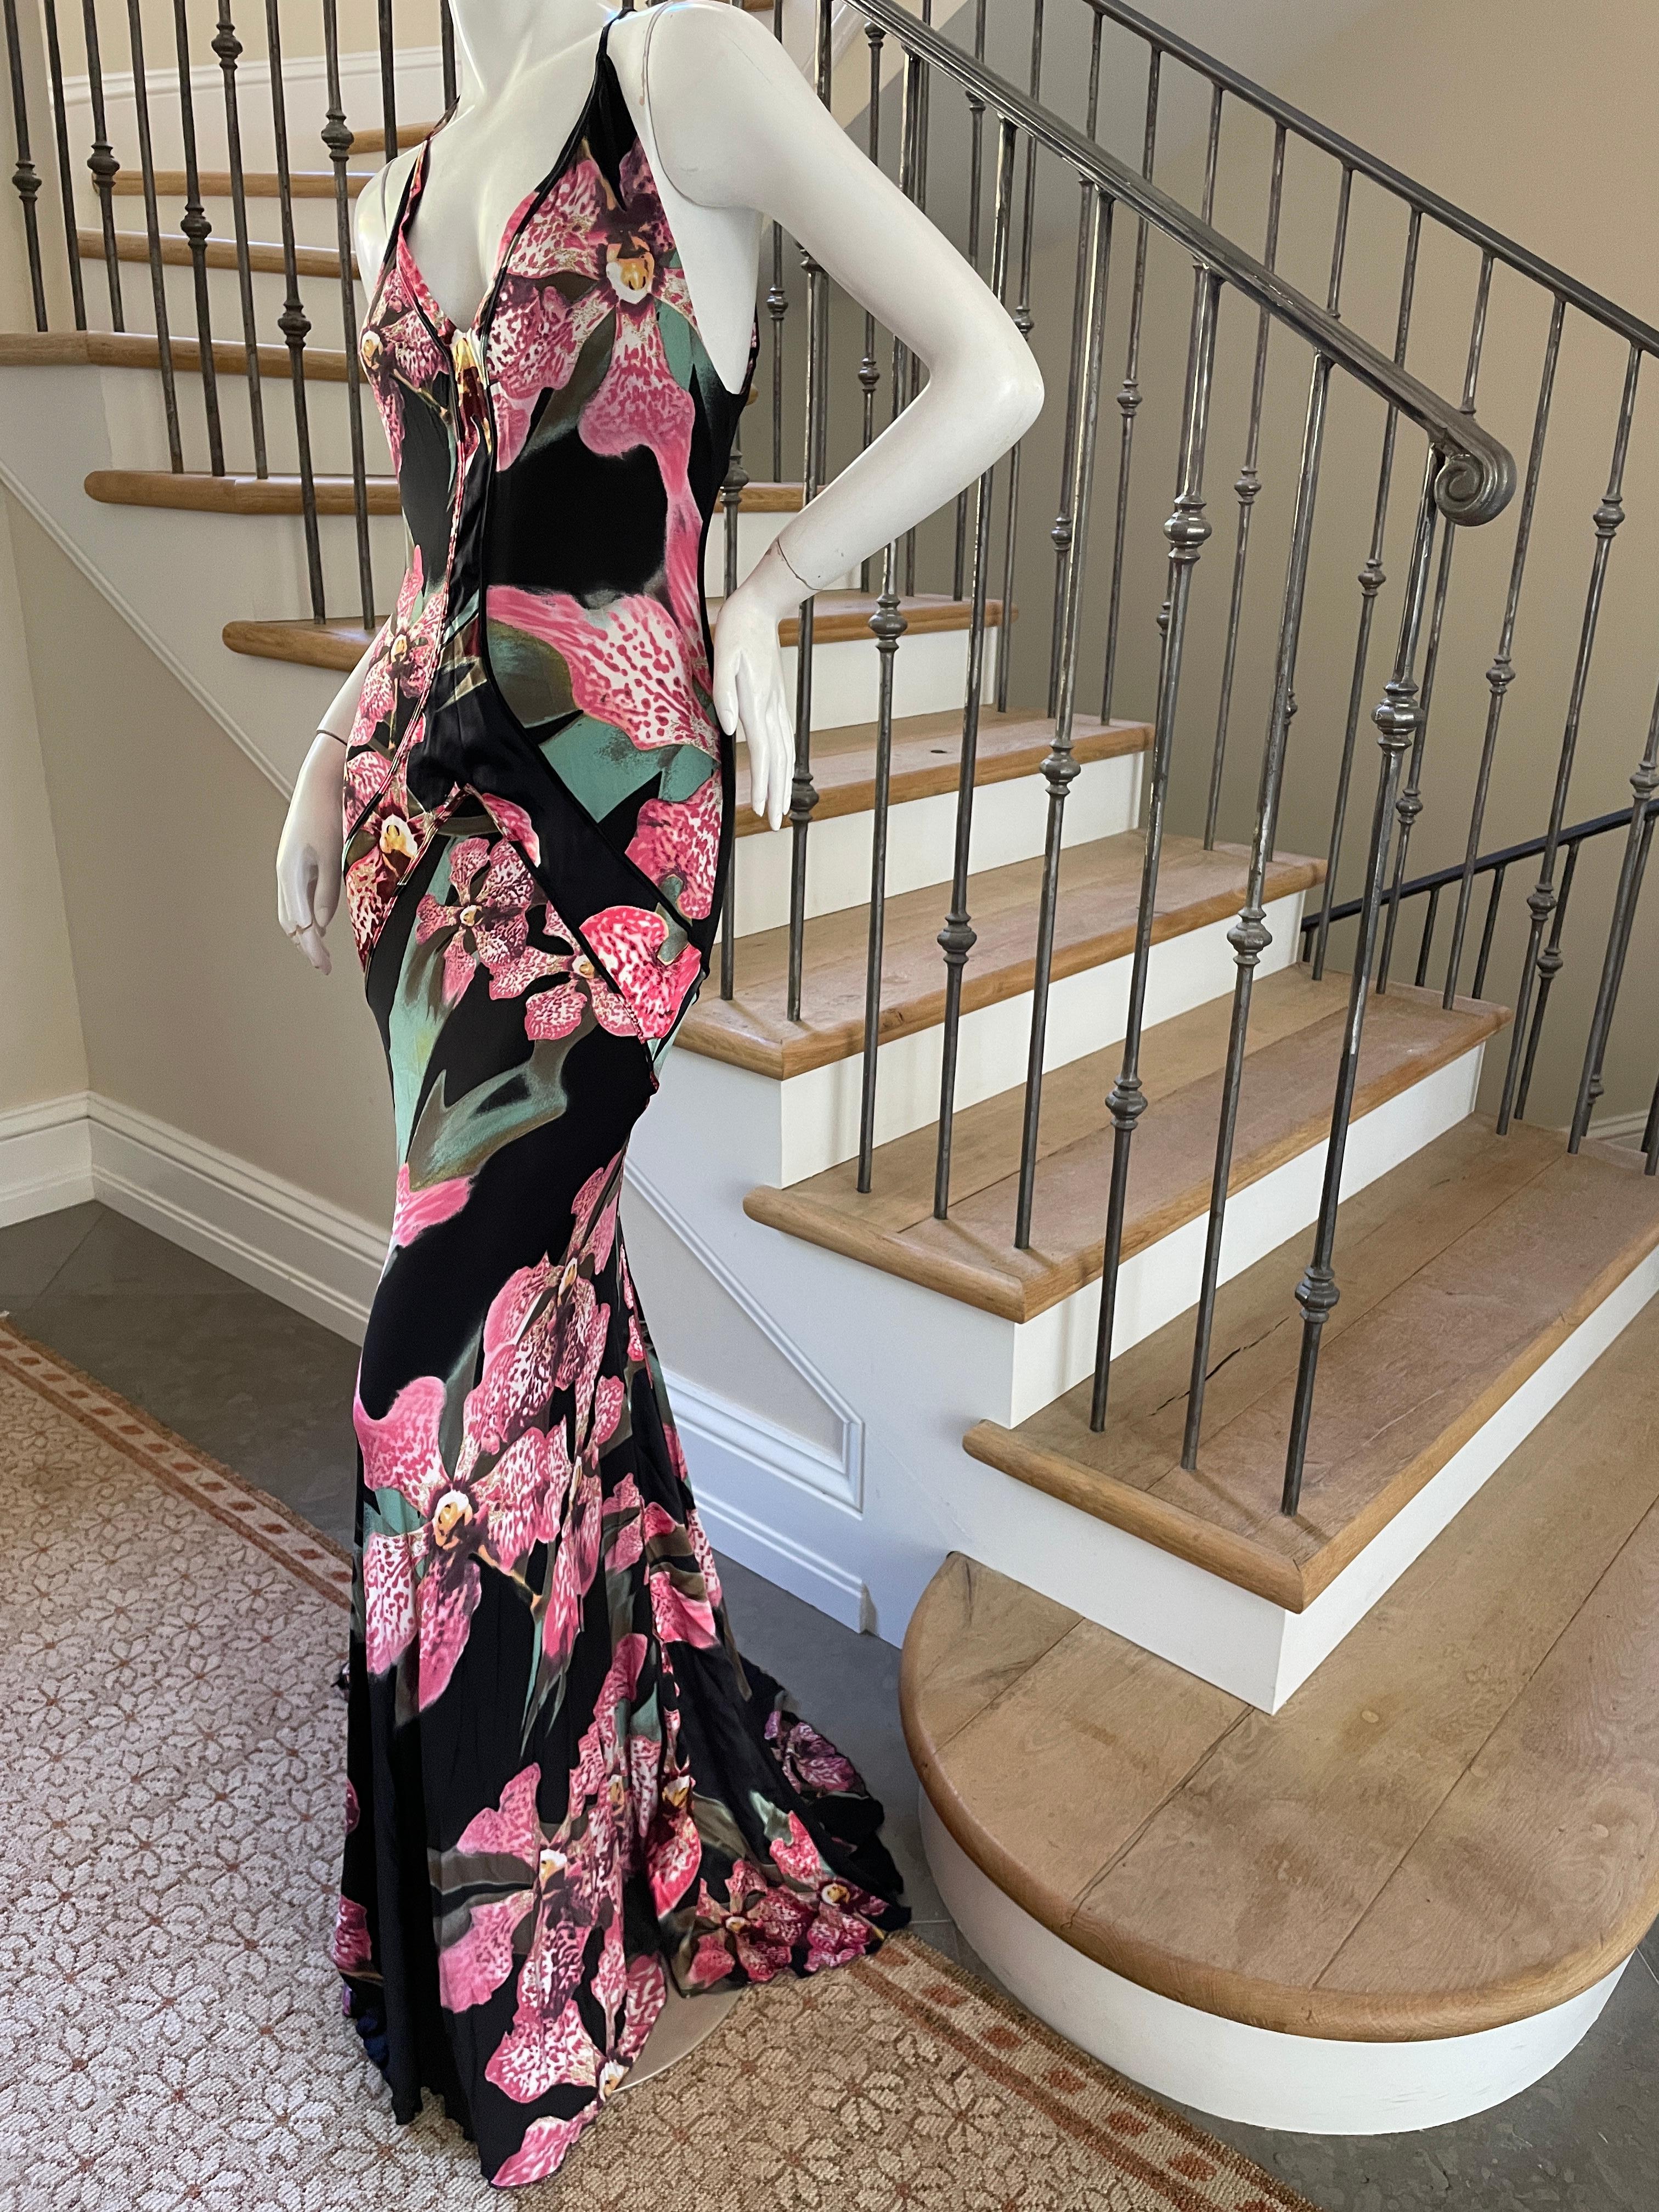 Roberto Cavalli Vintage Orchid Print Evening Dress with Short Train
 This is so petty, please use the zoom feature to see details, it's much better on .
Size M
  Bust 36